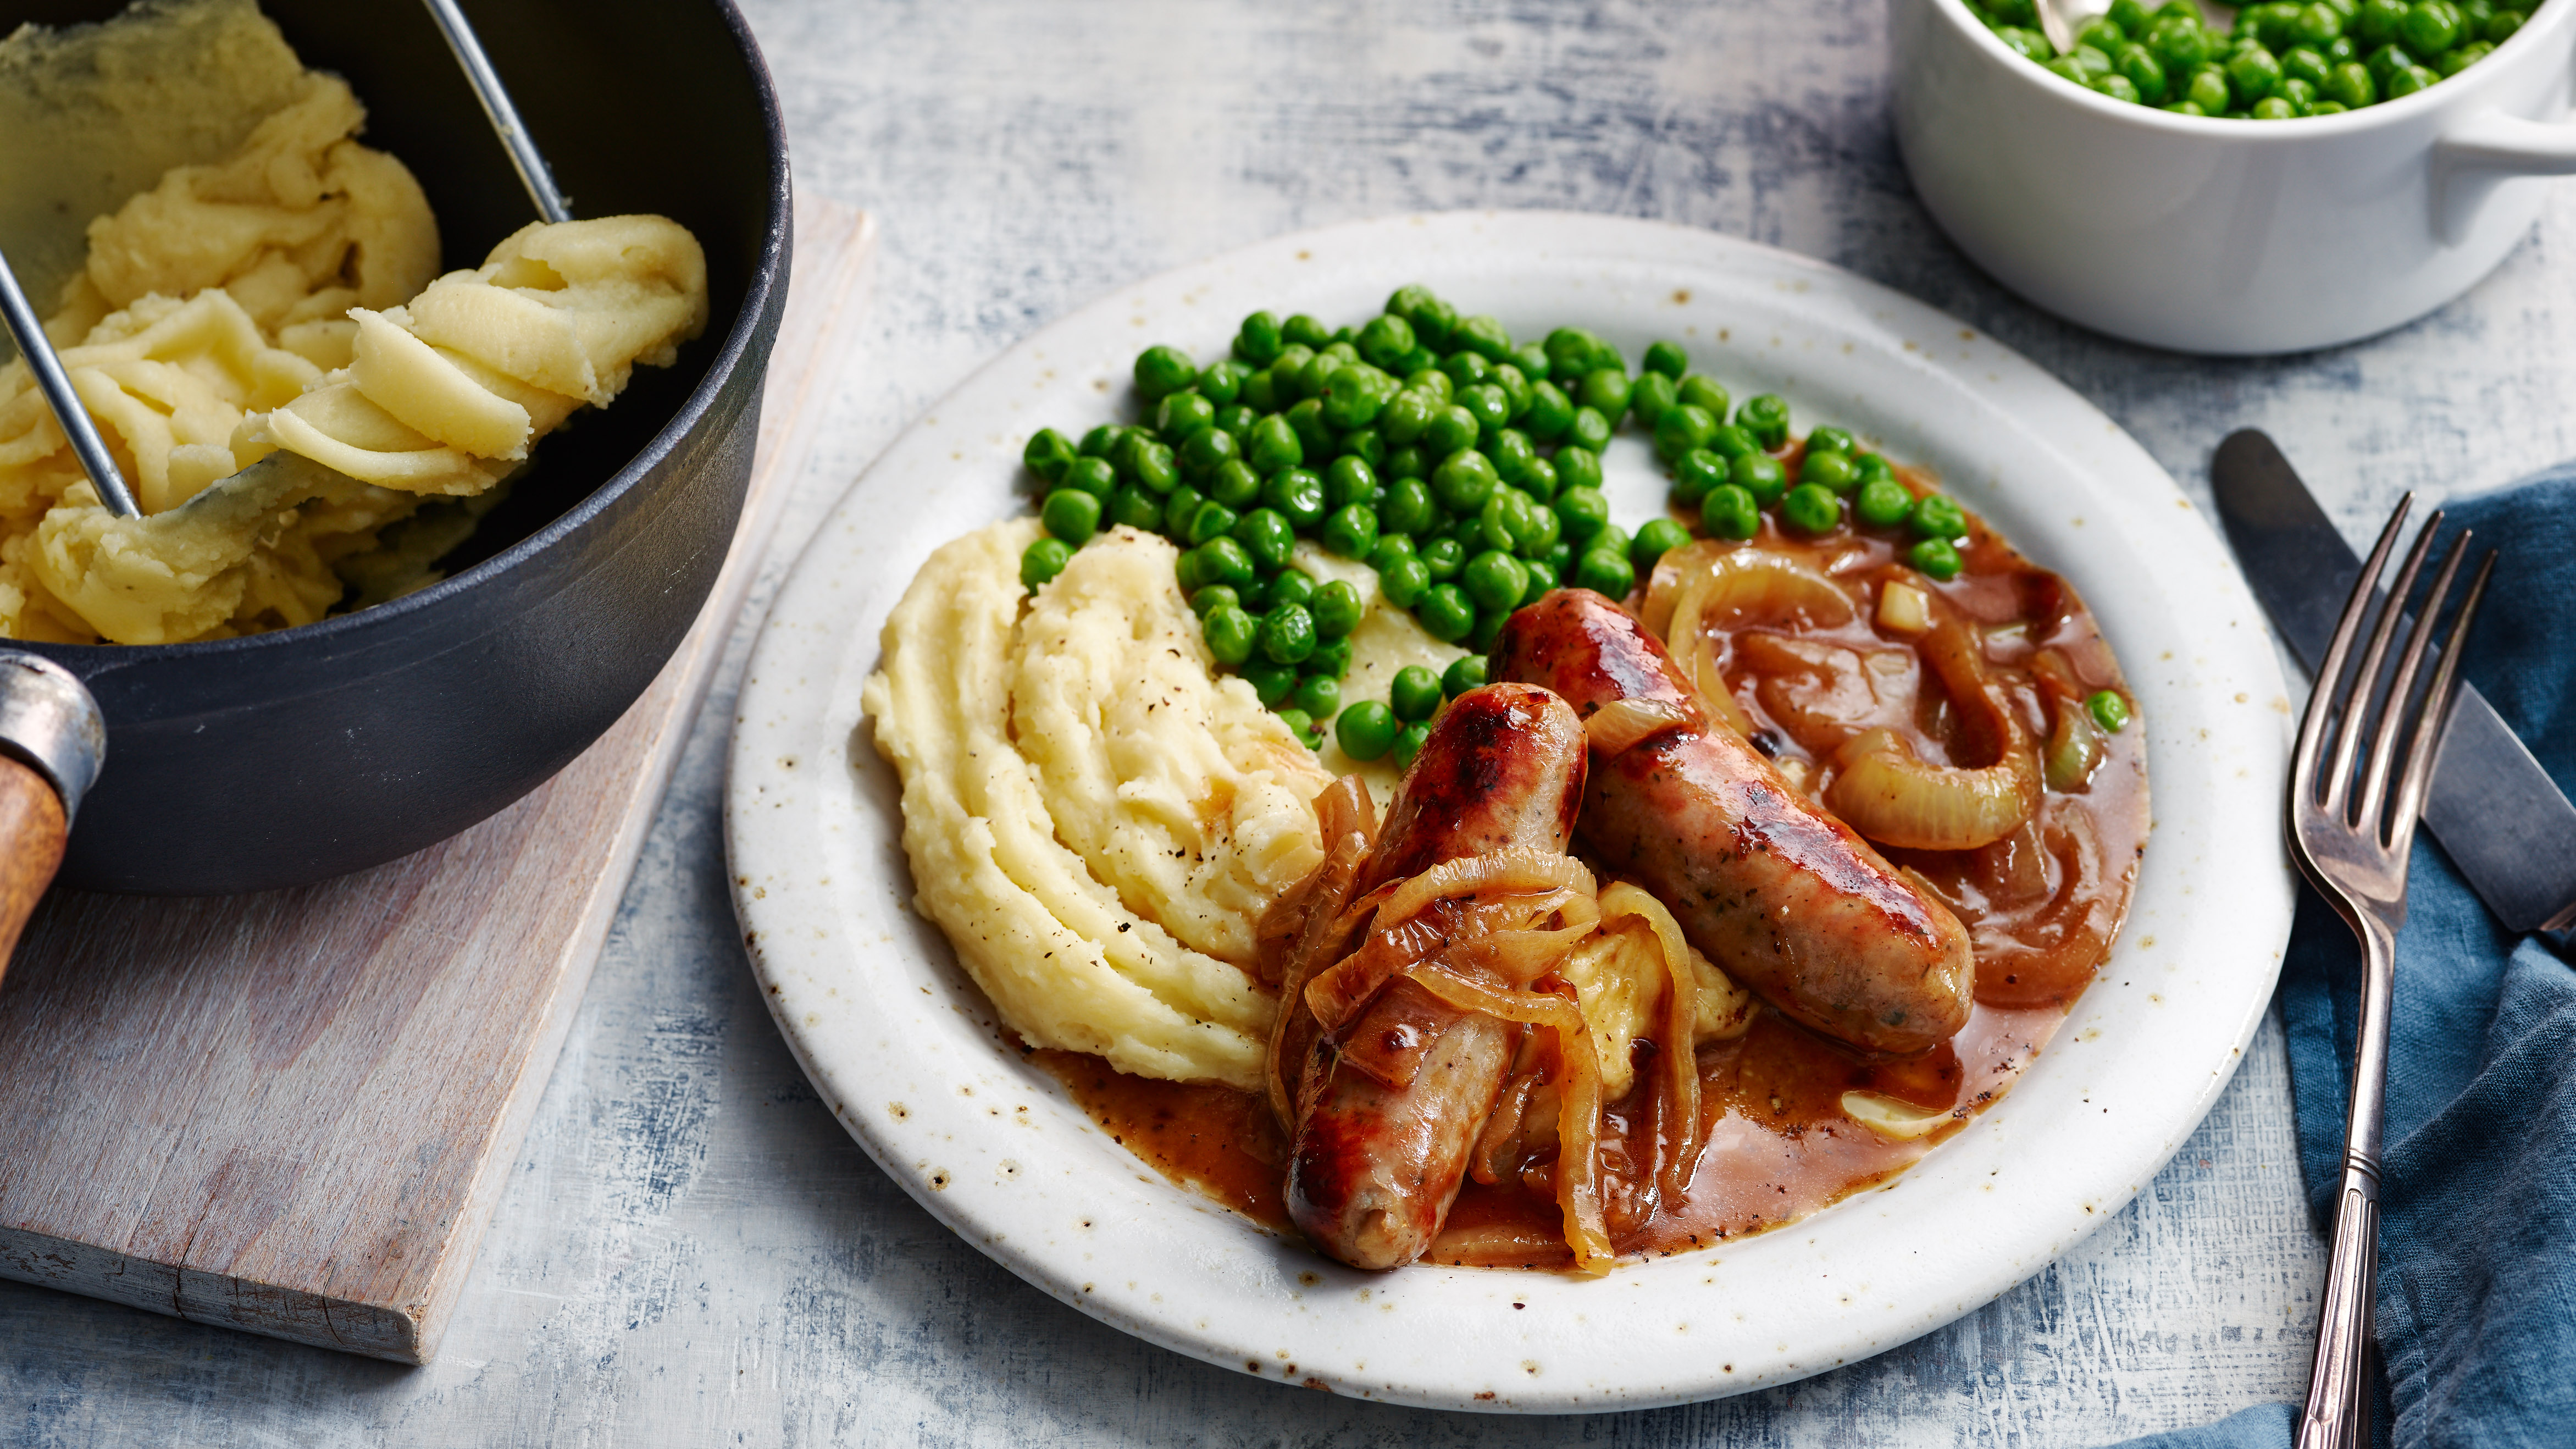 bangers_and_mash_with_80175_16x9.jpg